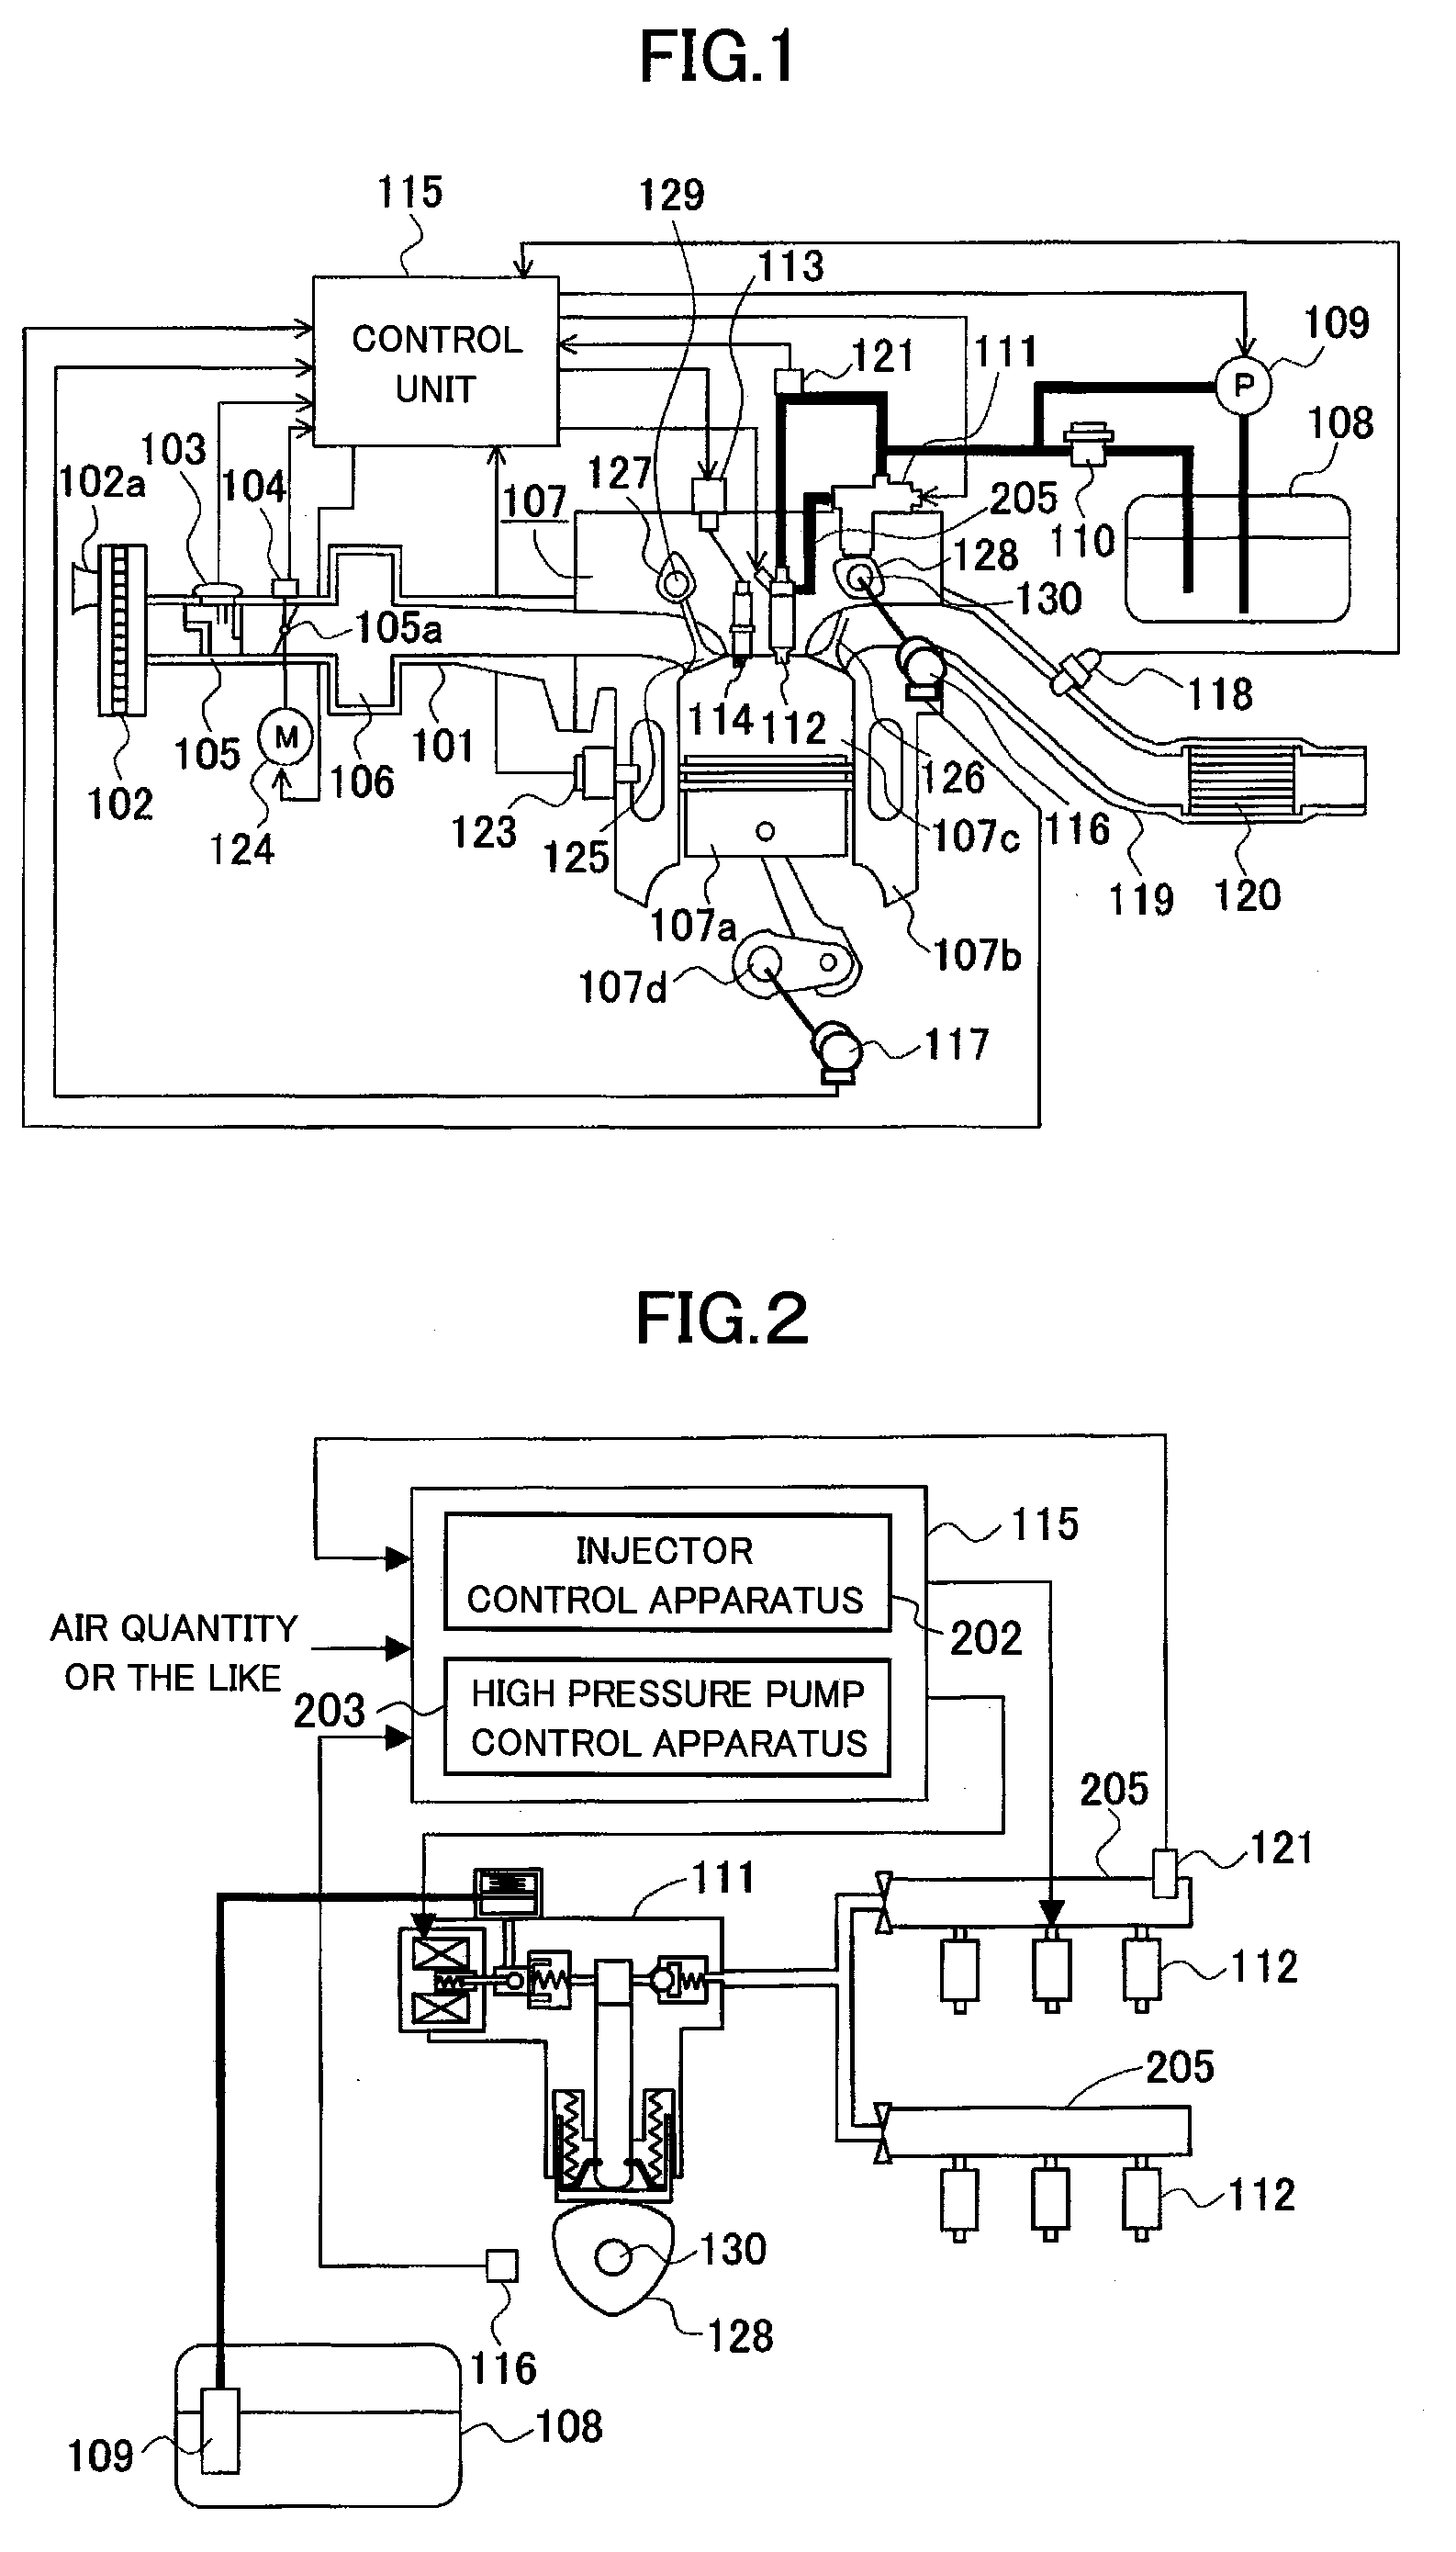 Control Apparatus for Cylinder Injection Internal Combustion Engine with High-Pressure Fuel Pump